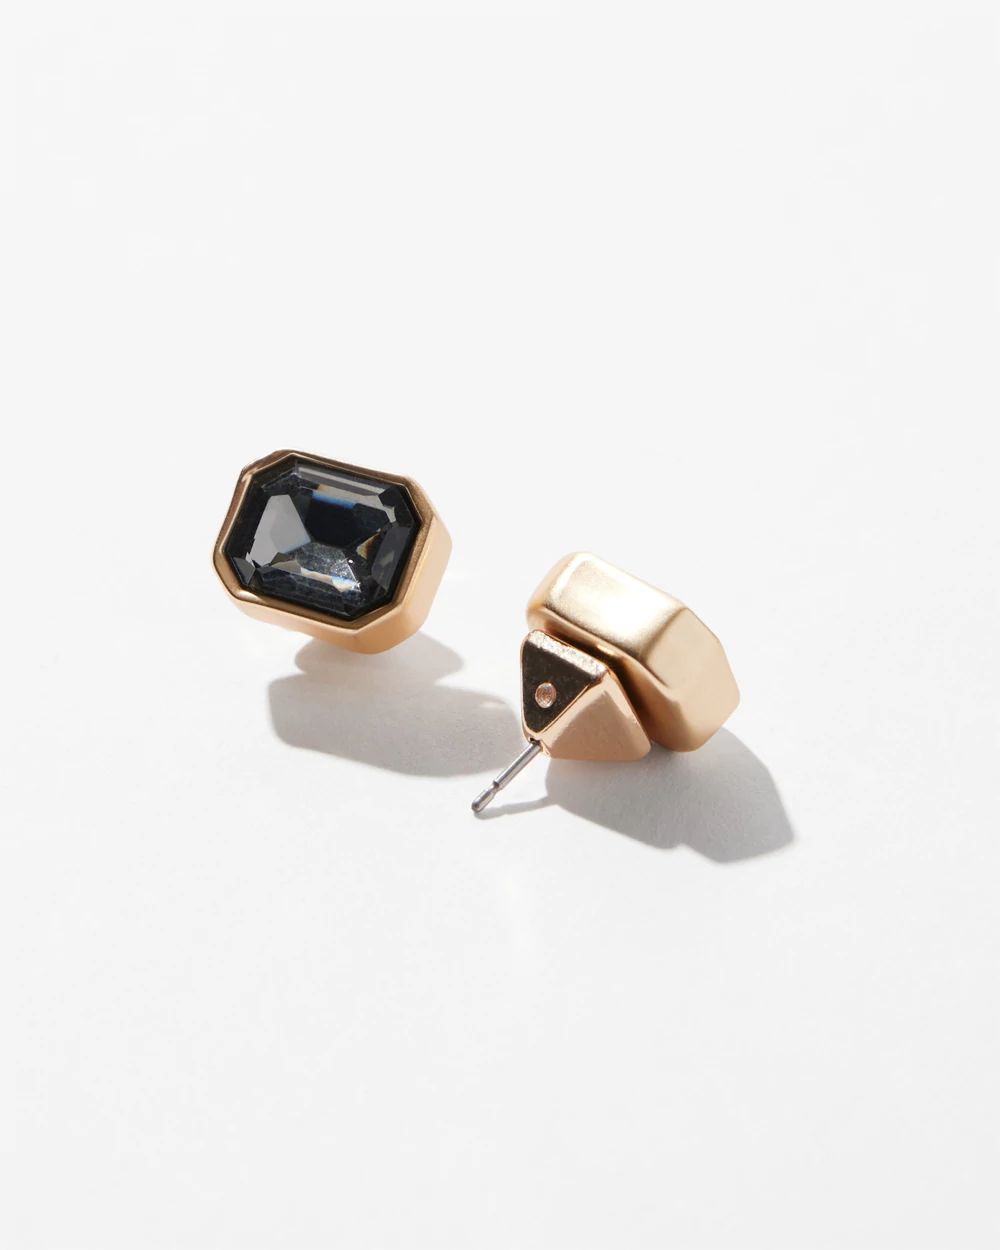 Gold Black Crystal Stud Earrings click to view larger image.